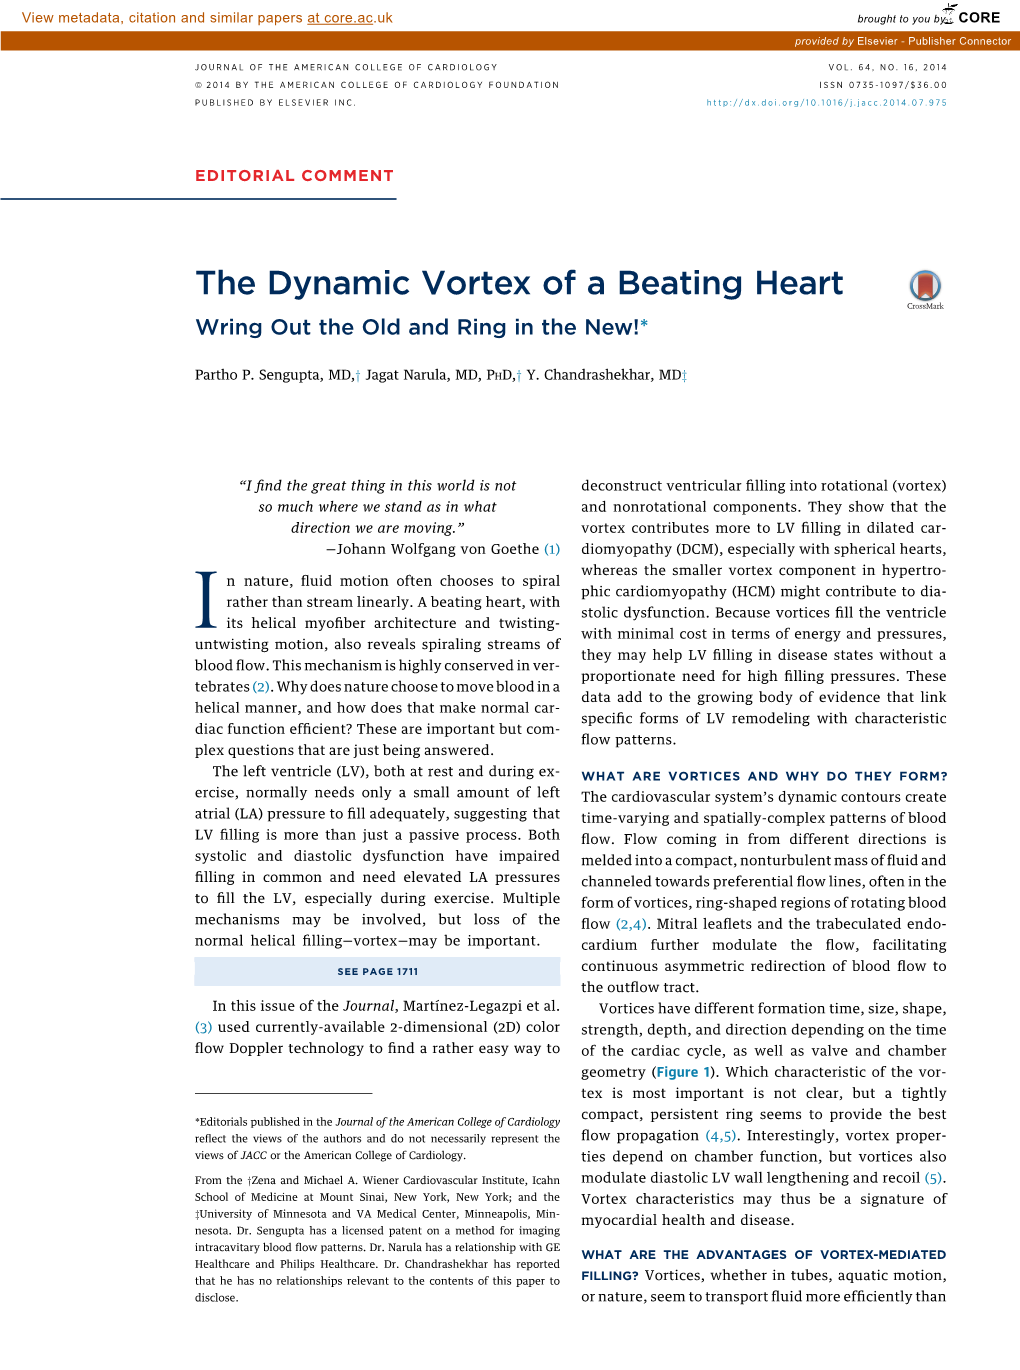 The Dynamic Vortex of a Beating Heart